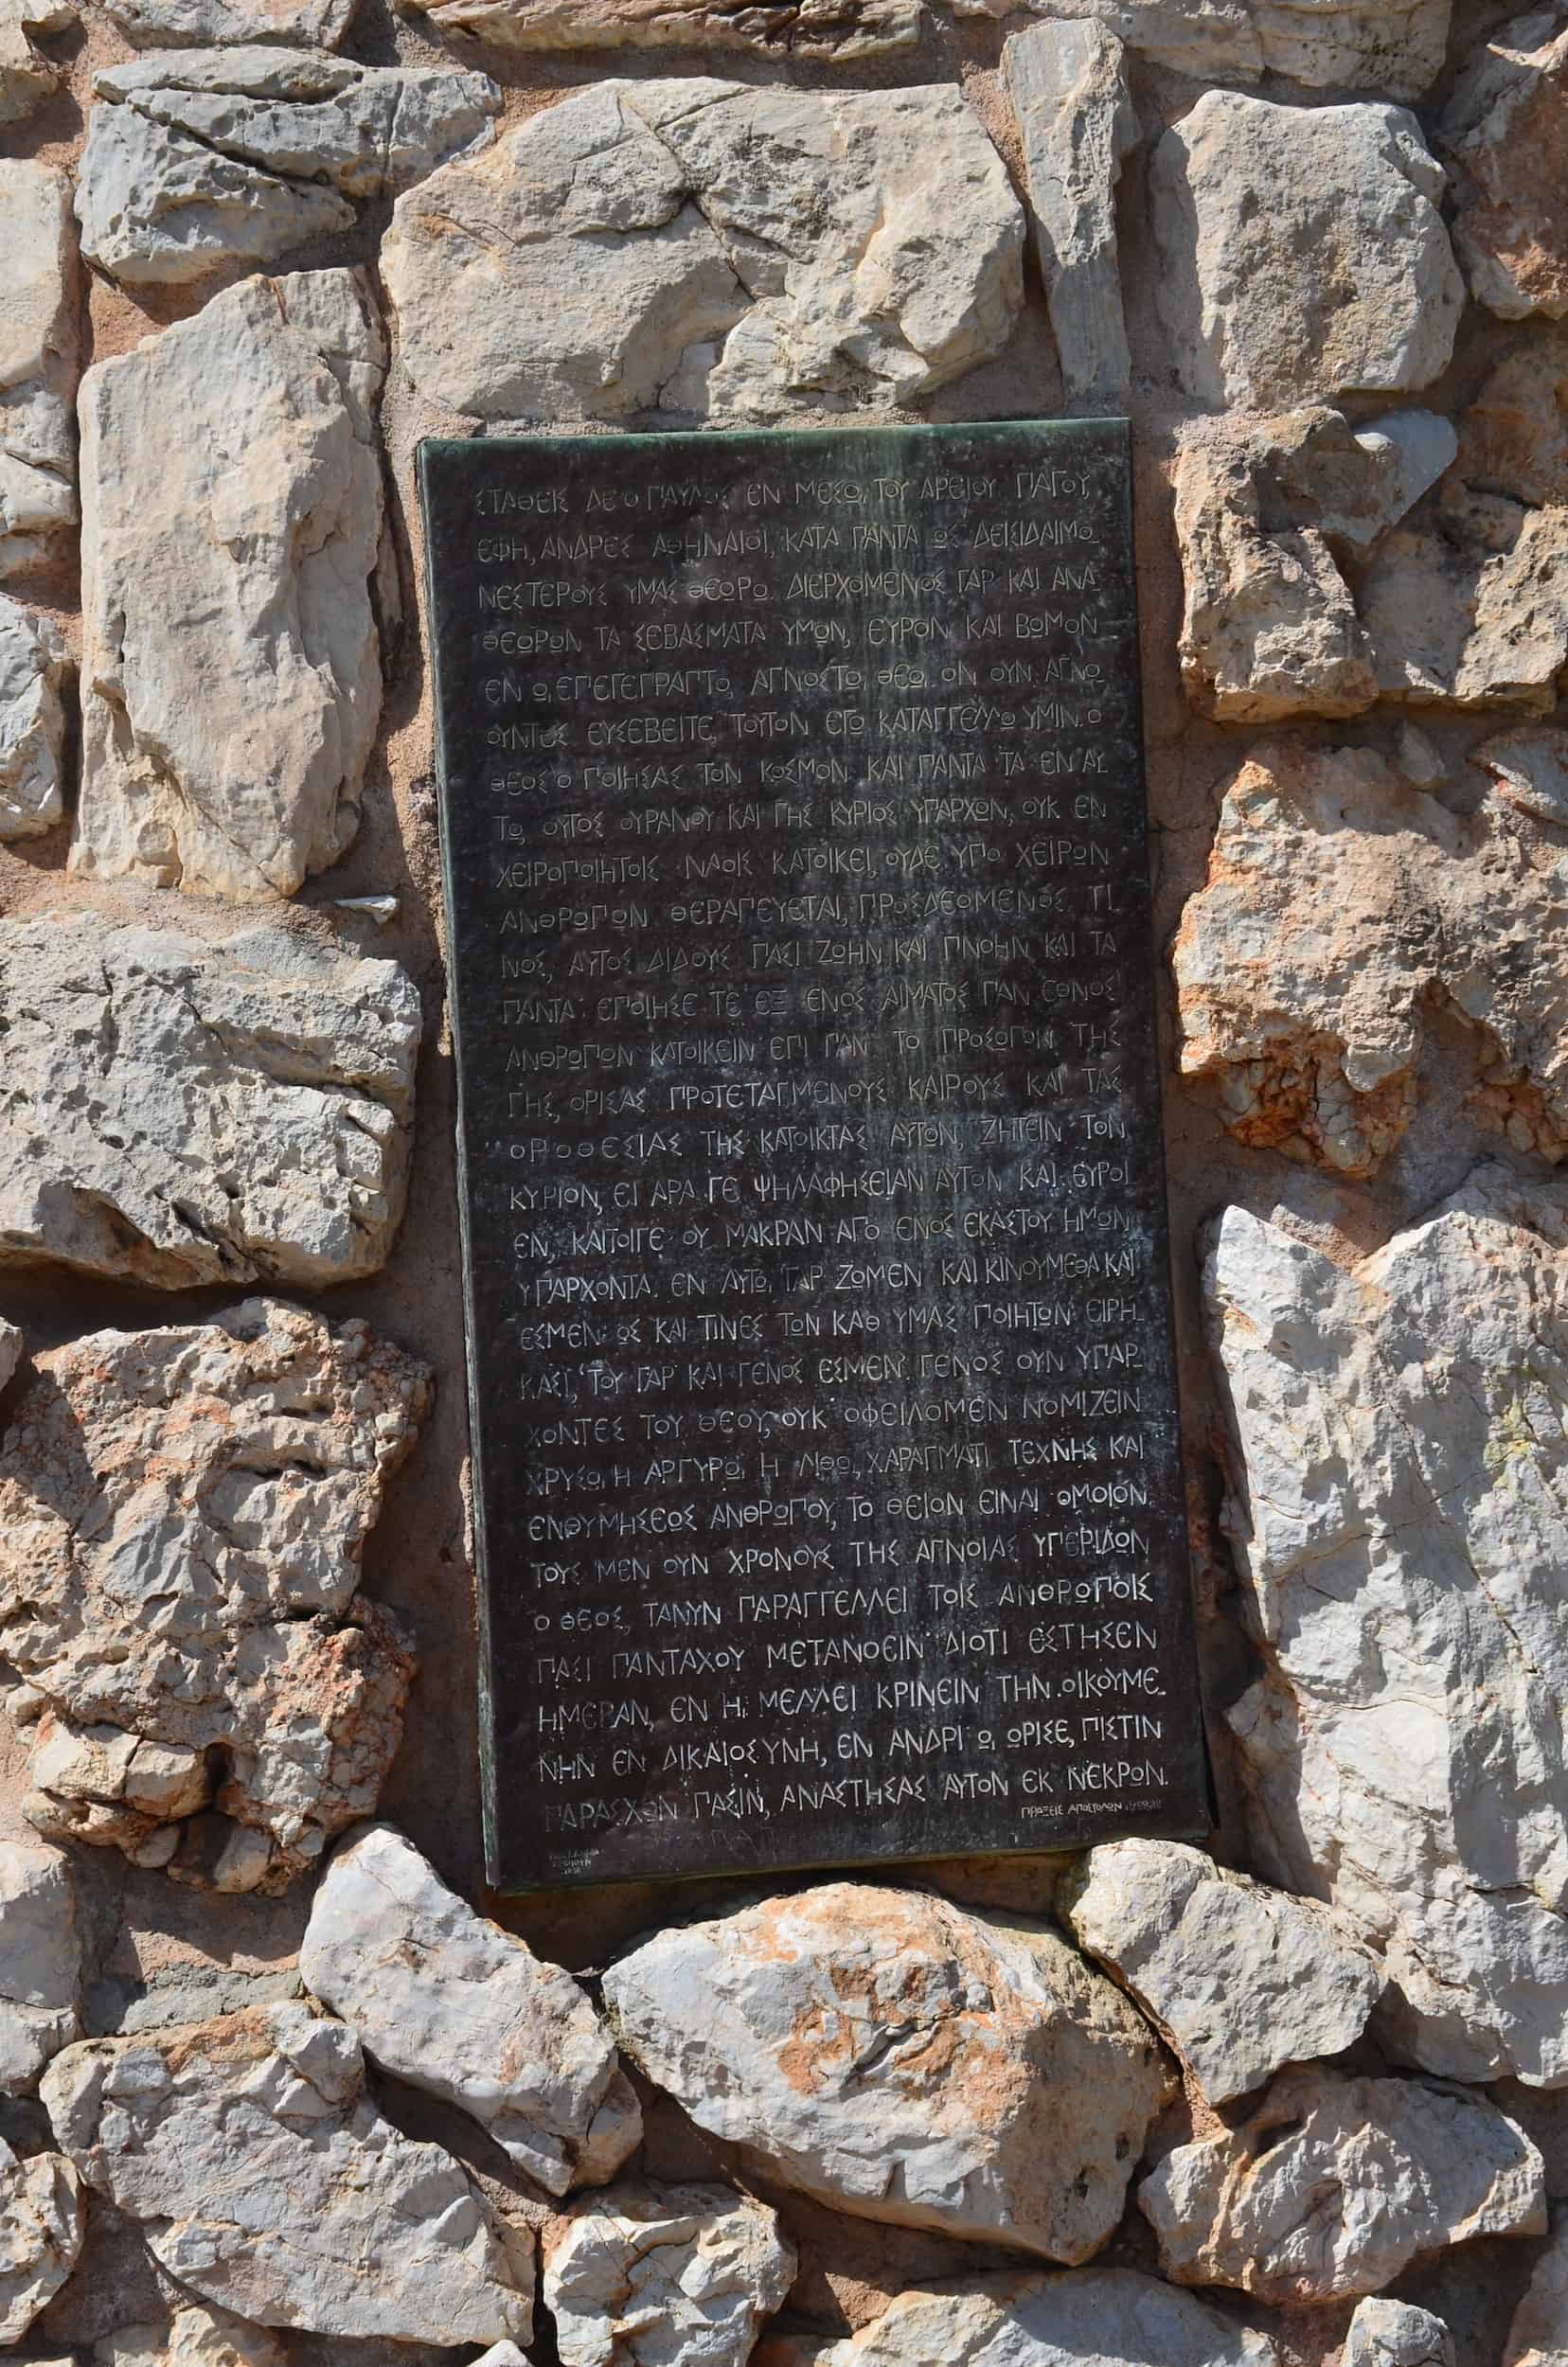 Plaque commemorating the Apostle Paul's sermon on Areopagus in Athens, Greece